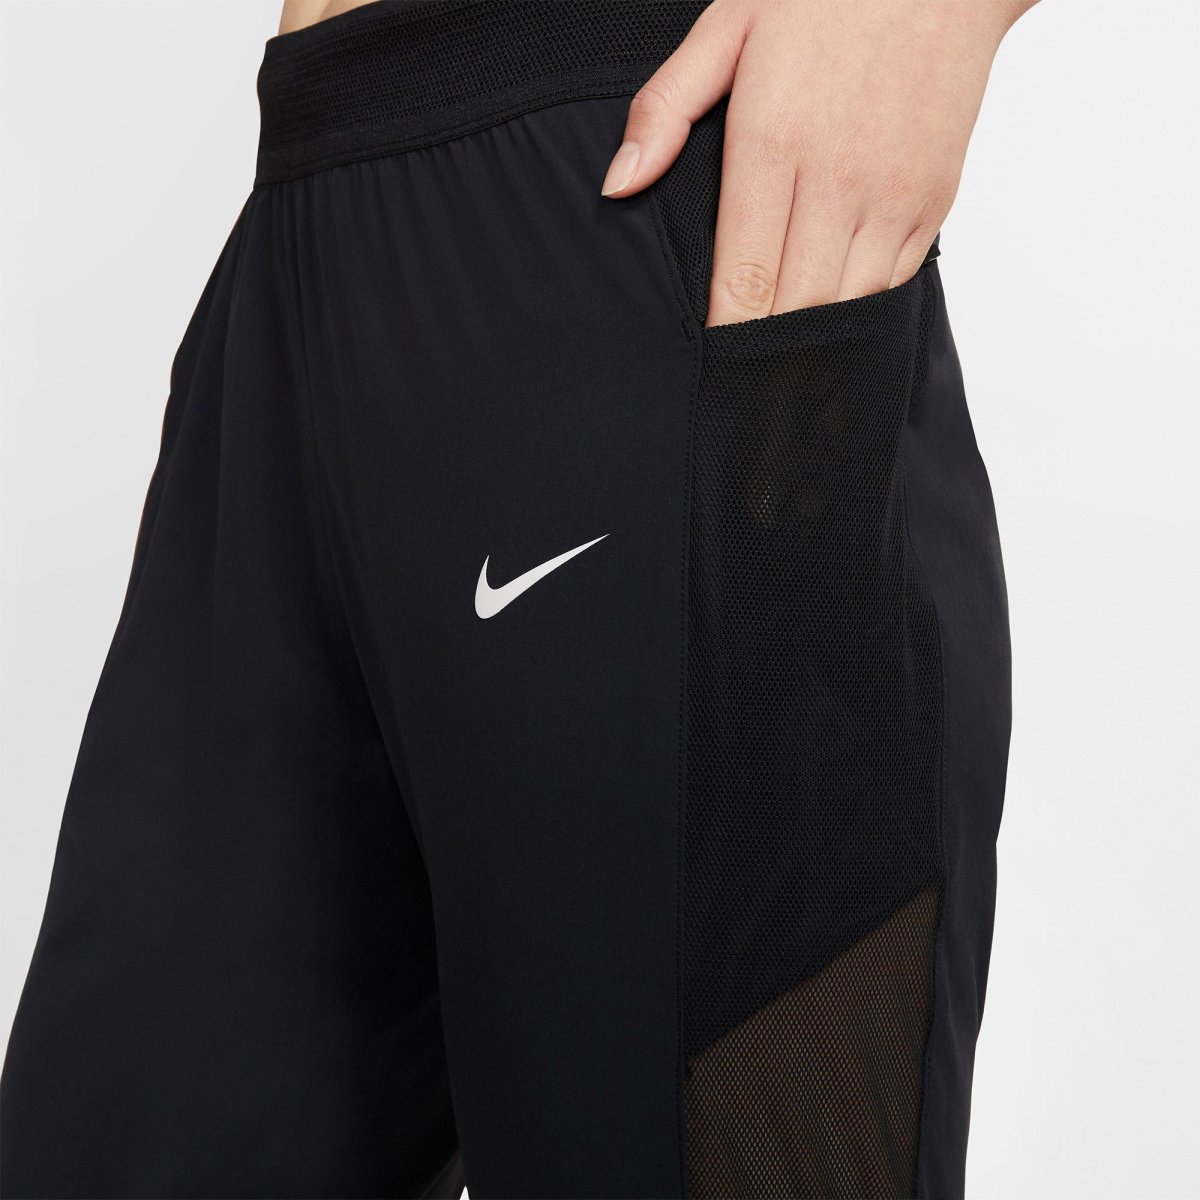 Nike Competition Storm Fit i Pant